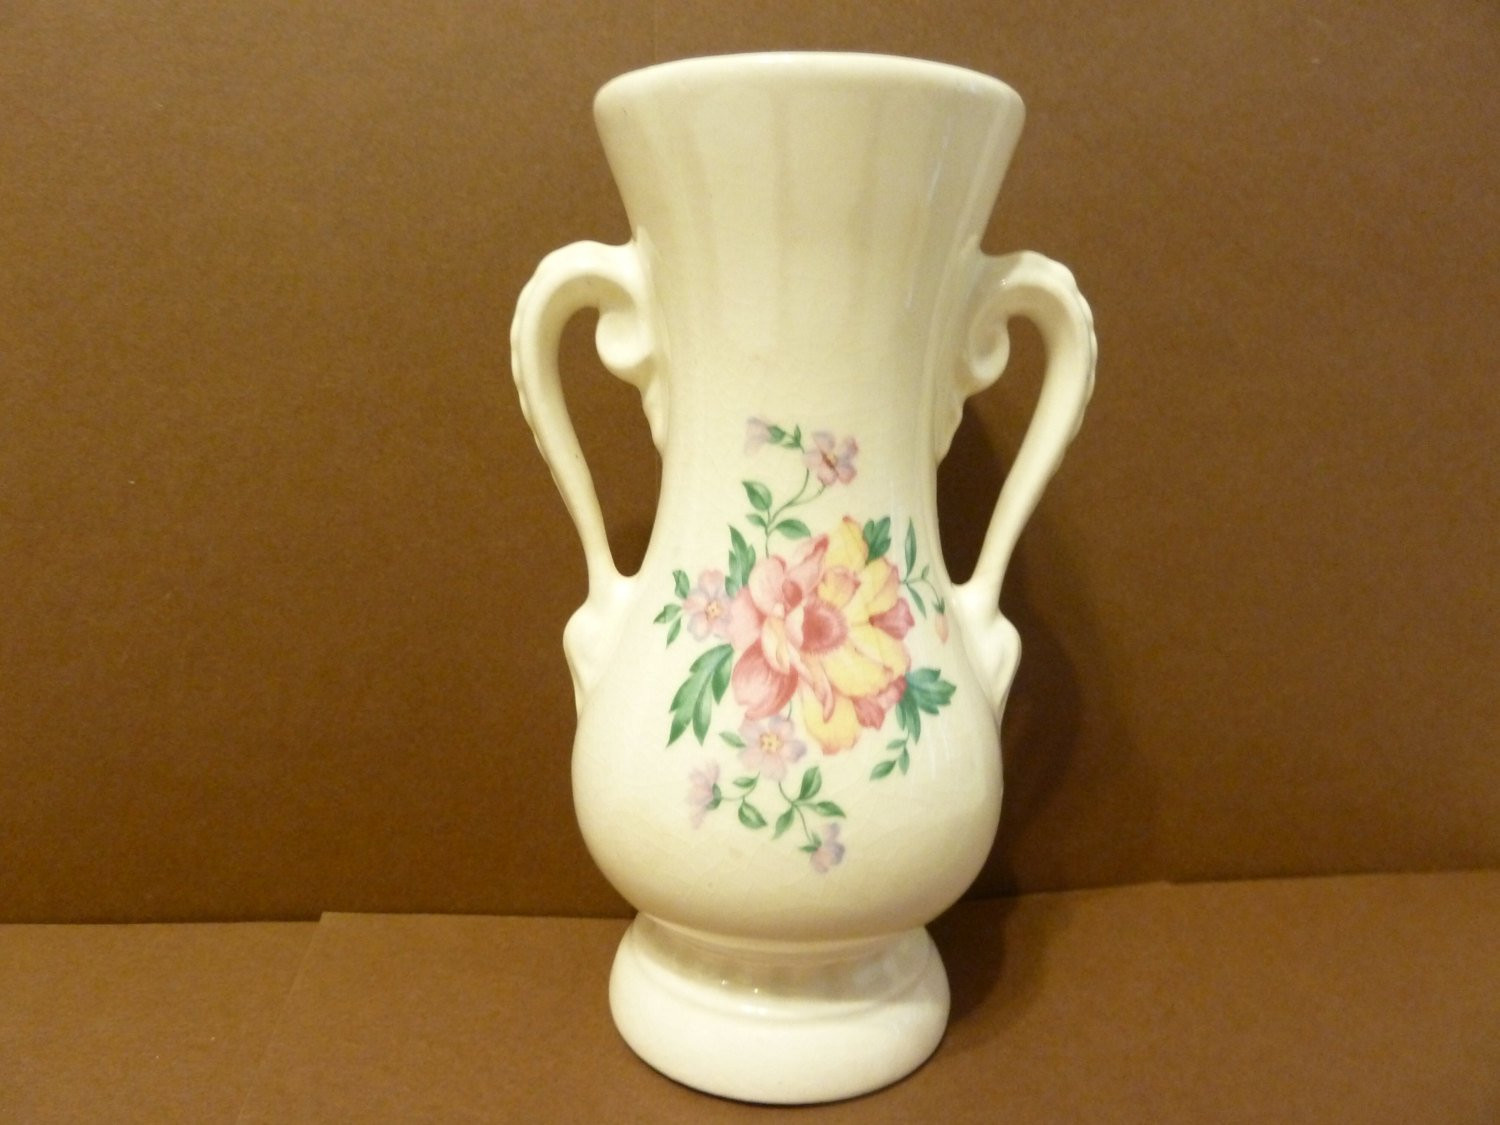 10 Lovable Lenox Bud Vases Set Of 3 2024 free download lenox bud vases set of 3 of bud vase double handle victorian style floral bouquet by inside dc29fc294c28ezoom